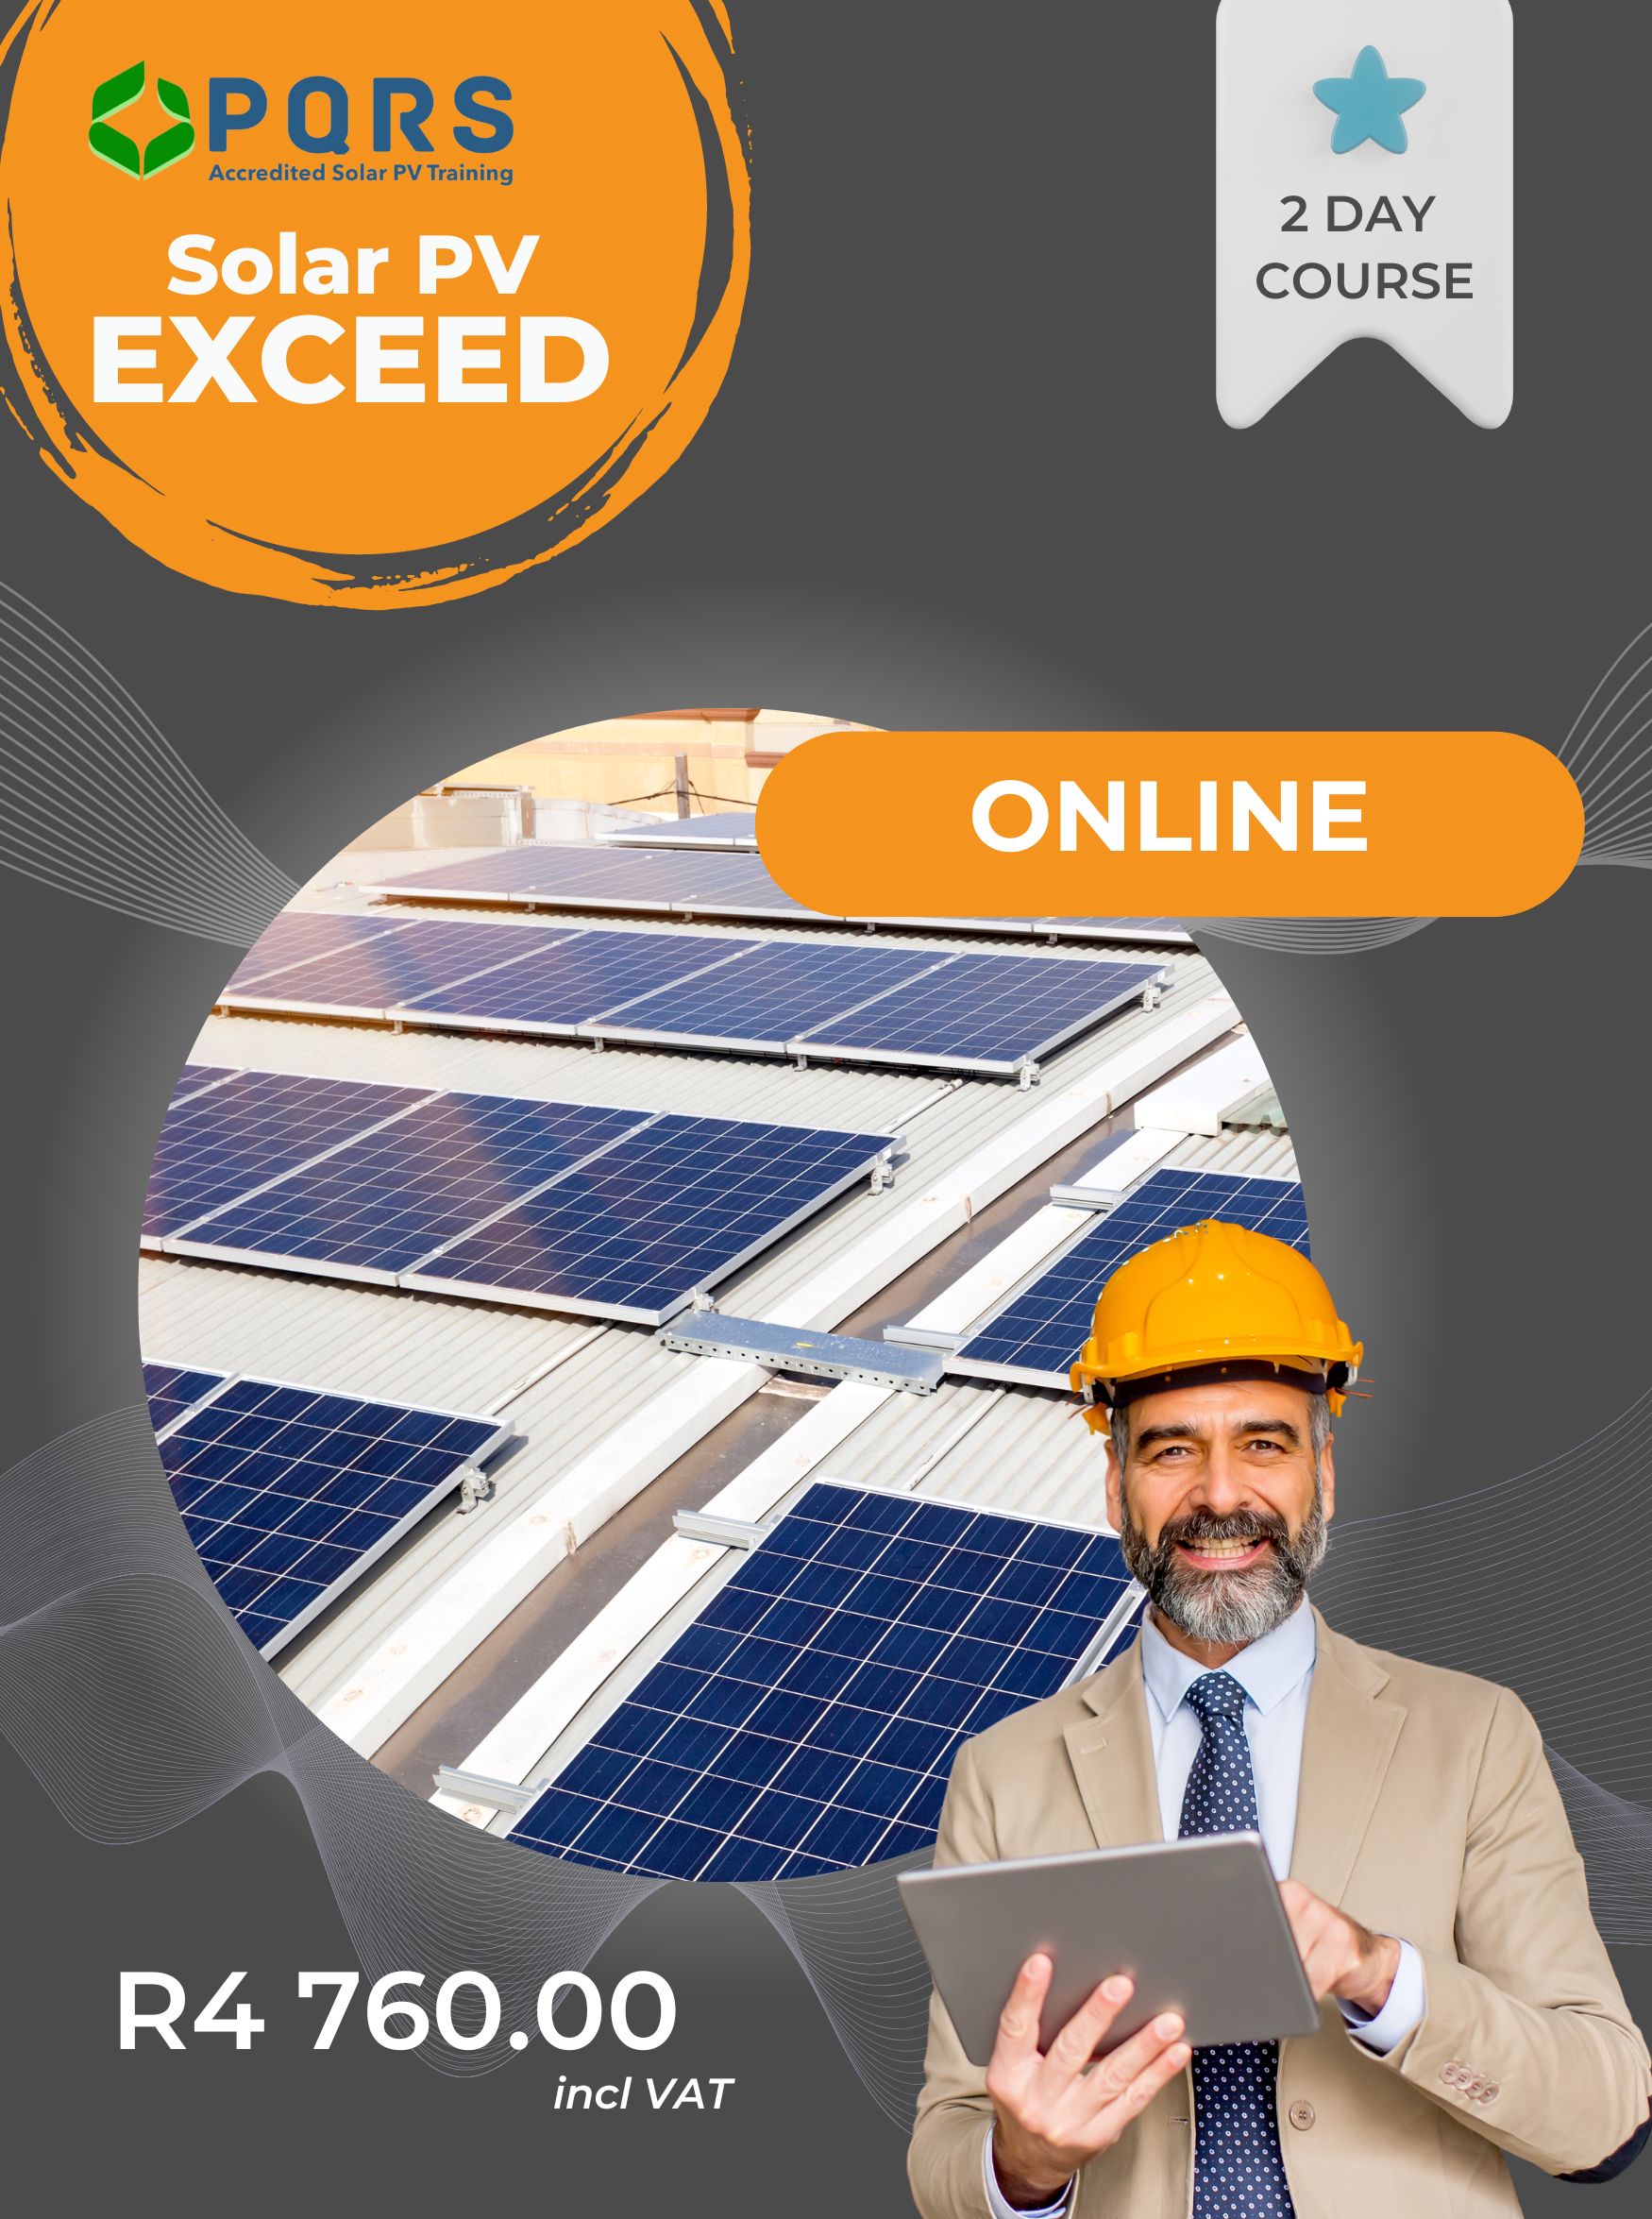 PQRS Solar Pv Exceed Online Course